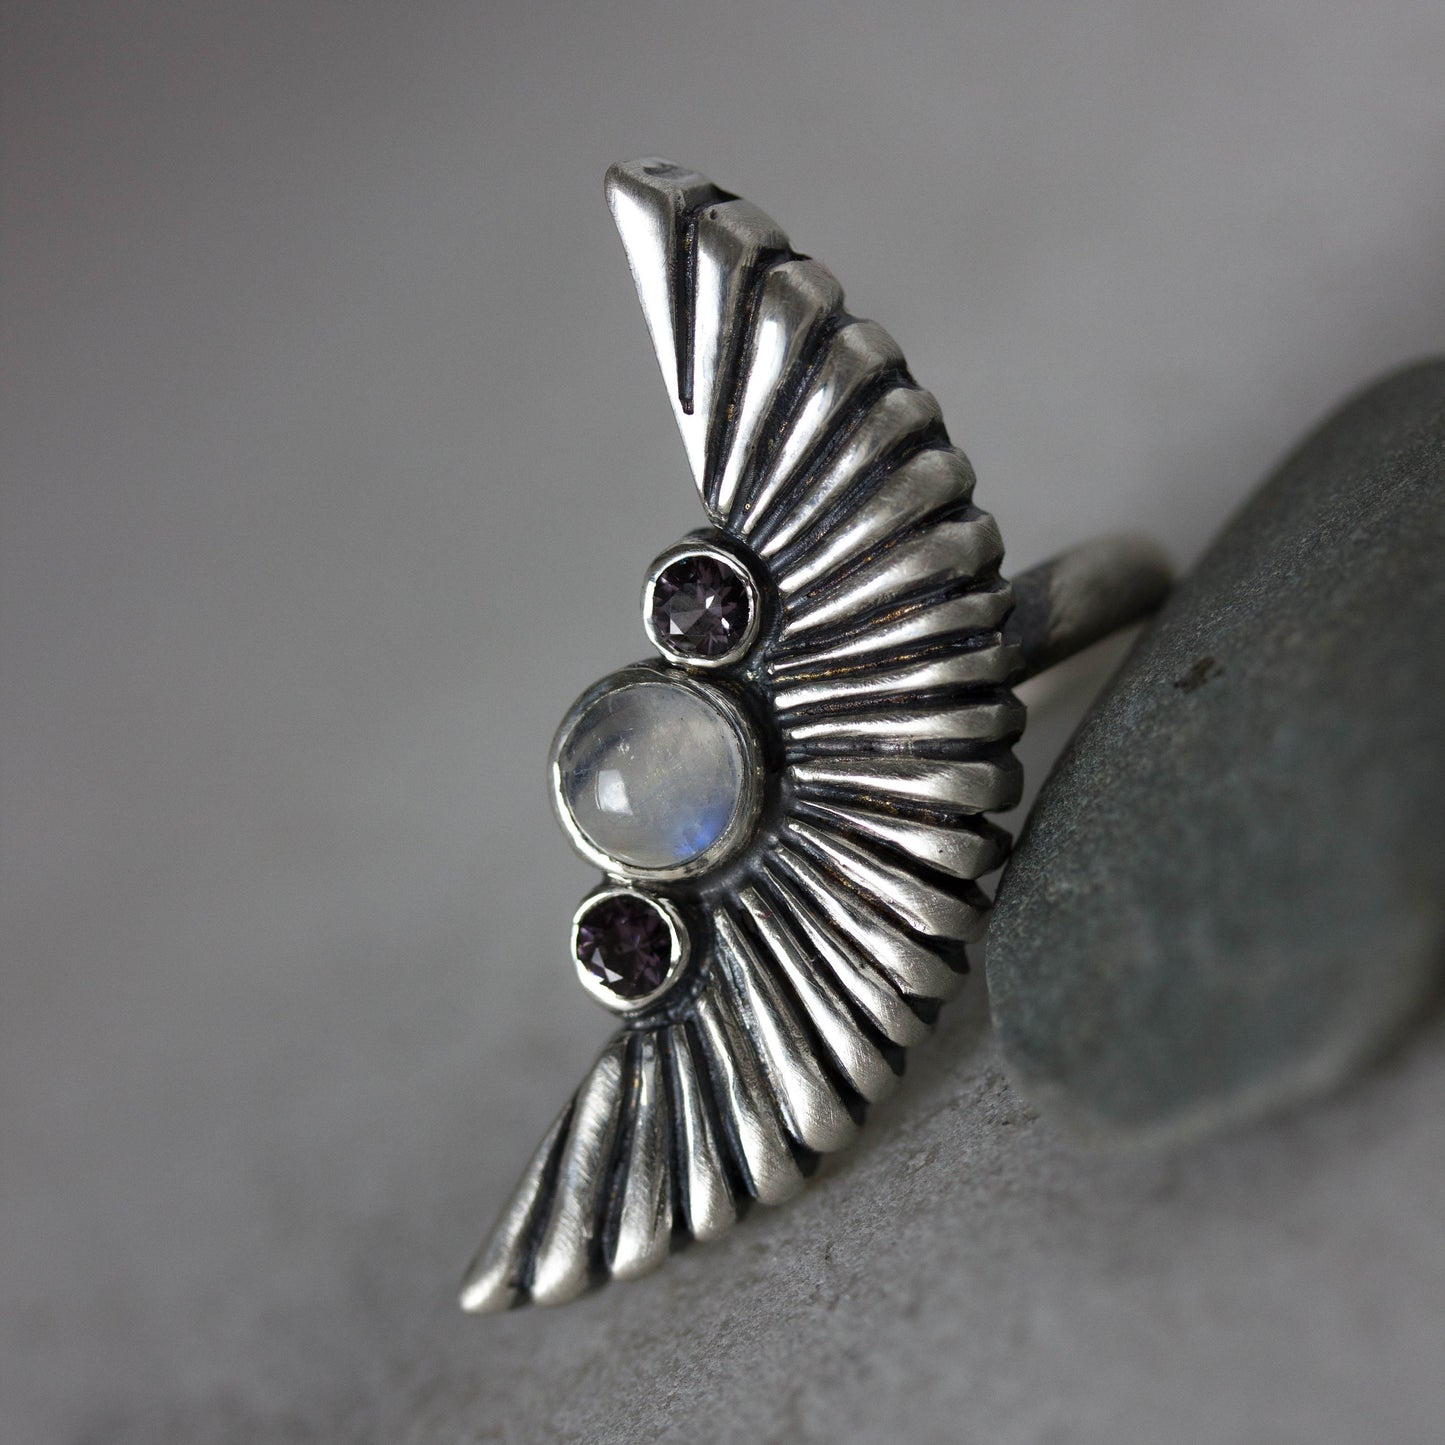 A handmade Silver Wing Statement Ring featuring a Rainbow Moonstone and Garnet Stone from Cassin Jewelry.